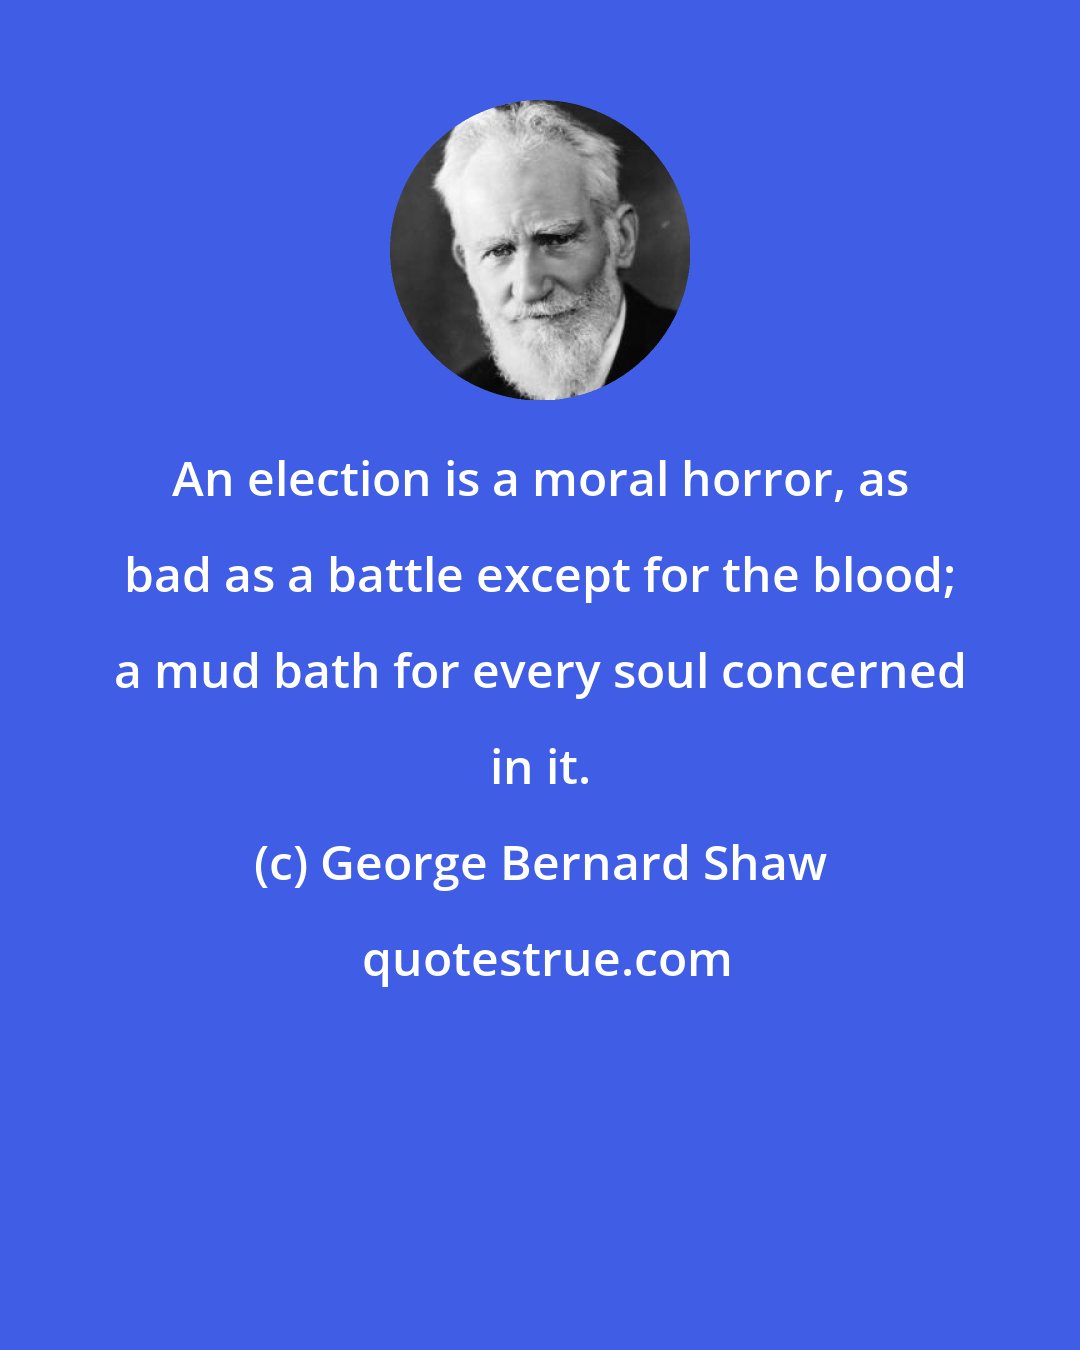 George Bernard Shaw: An election is a moral horror, as bad as a battle except for the blood; a mud bath for every soul concerned in it.